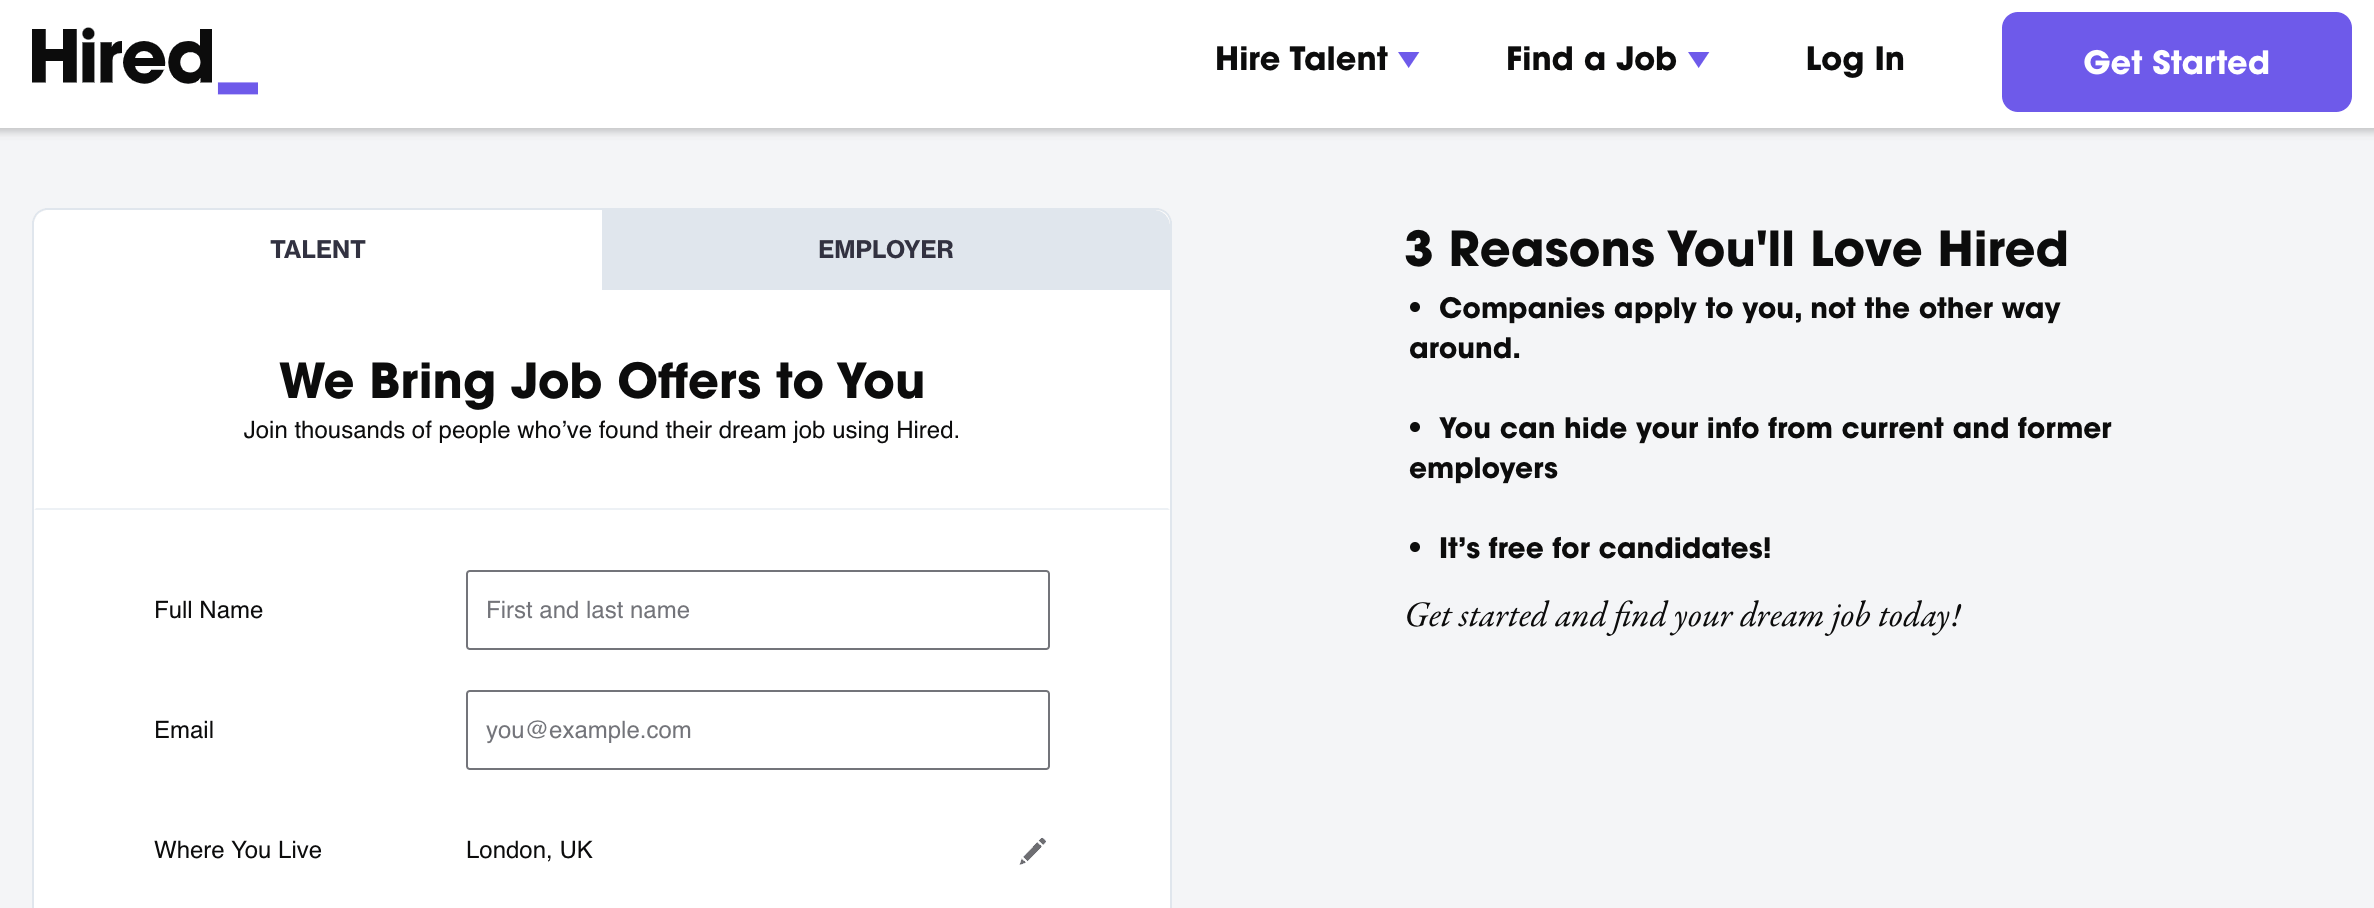 hired-landing-page